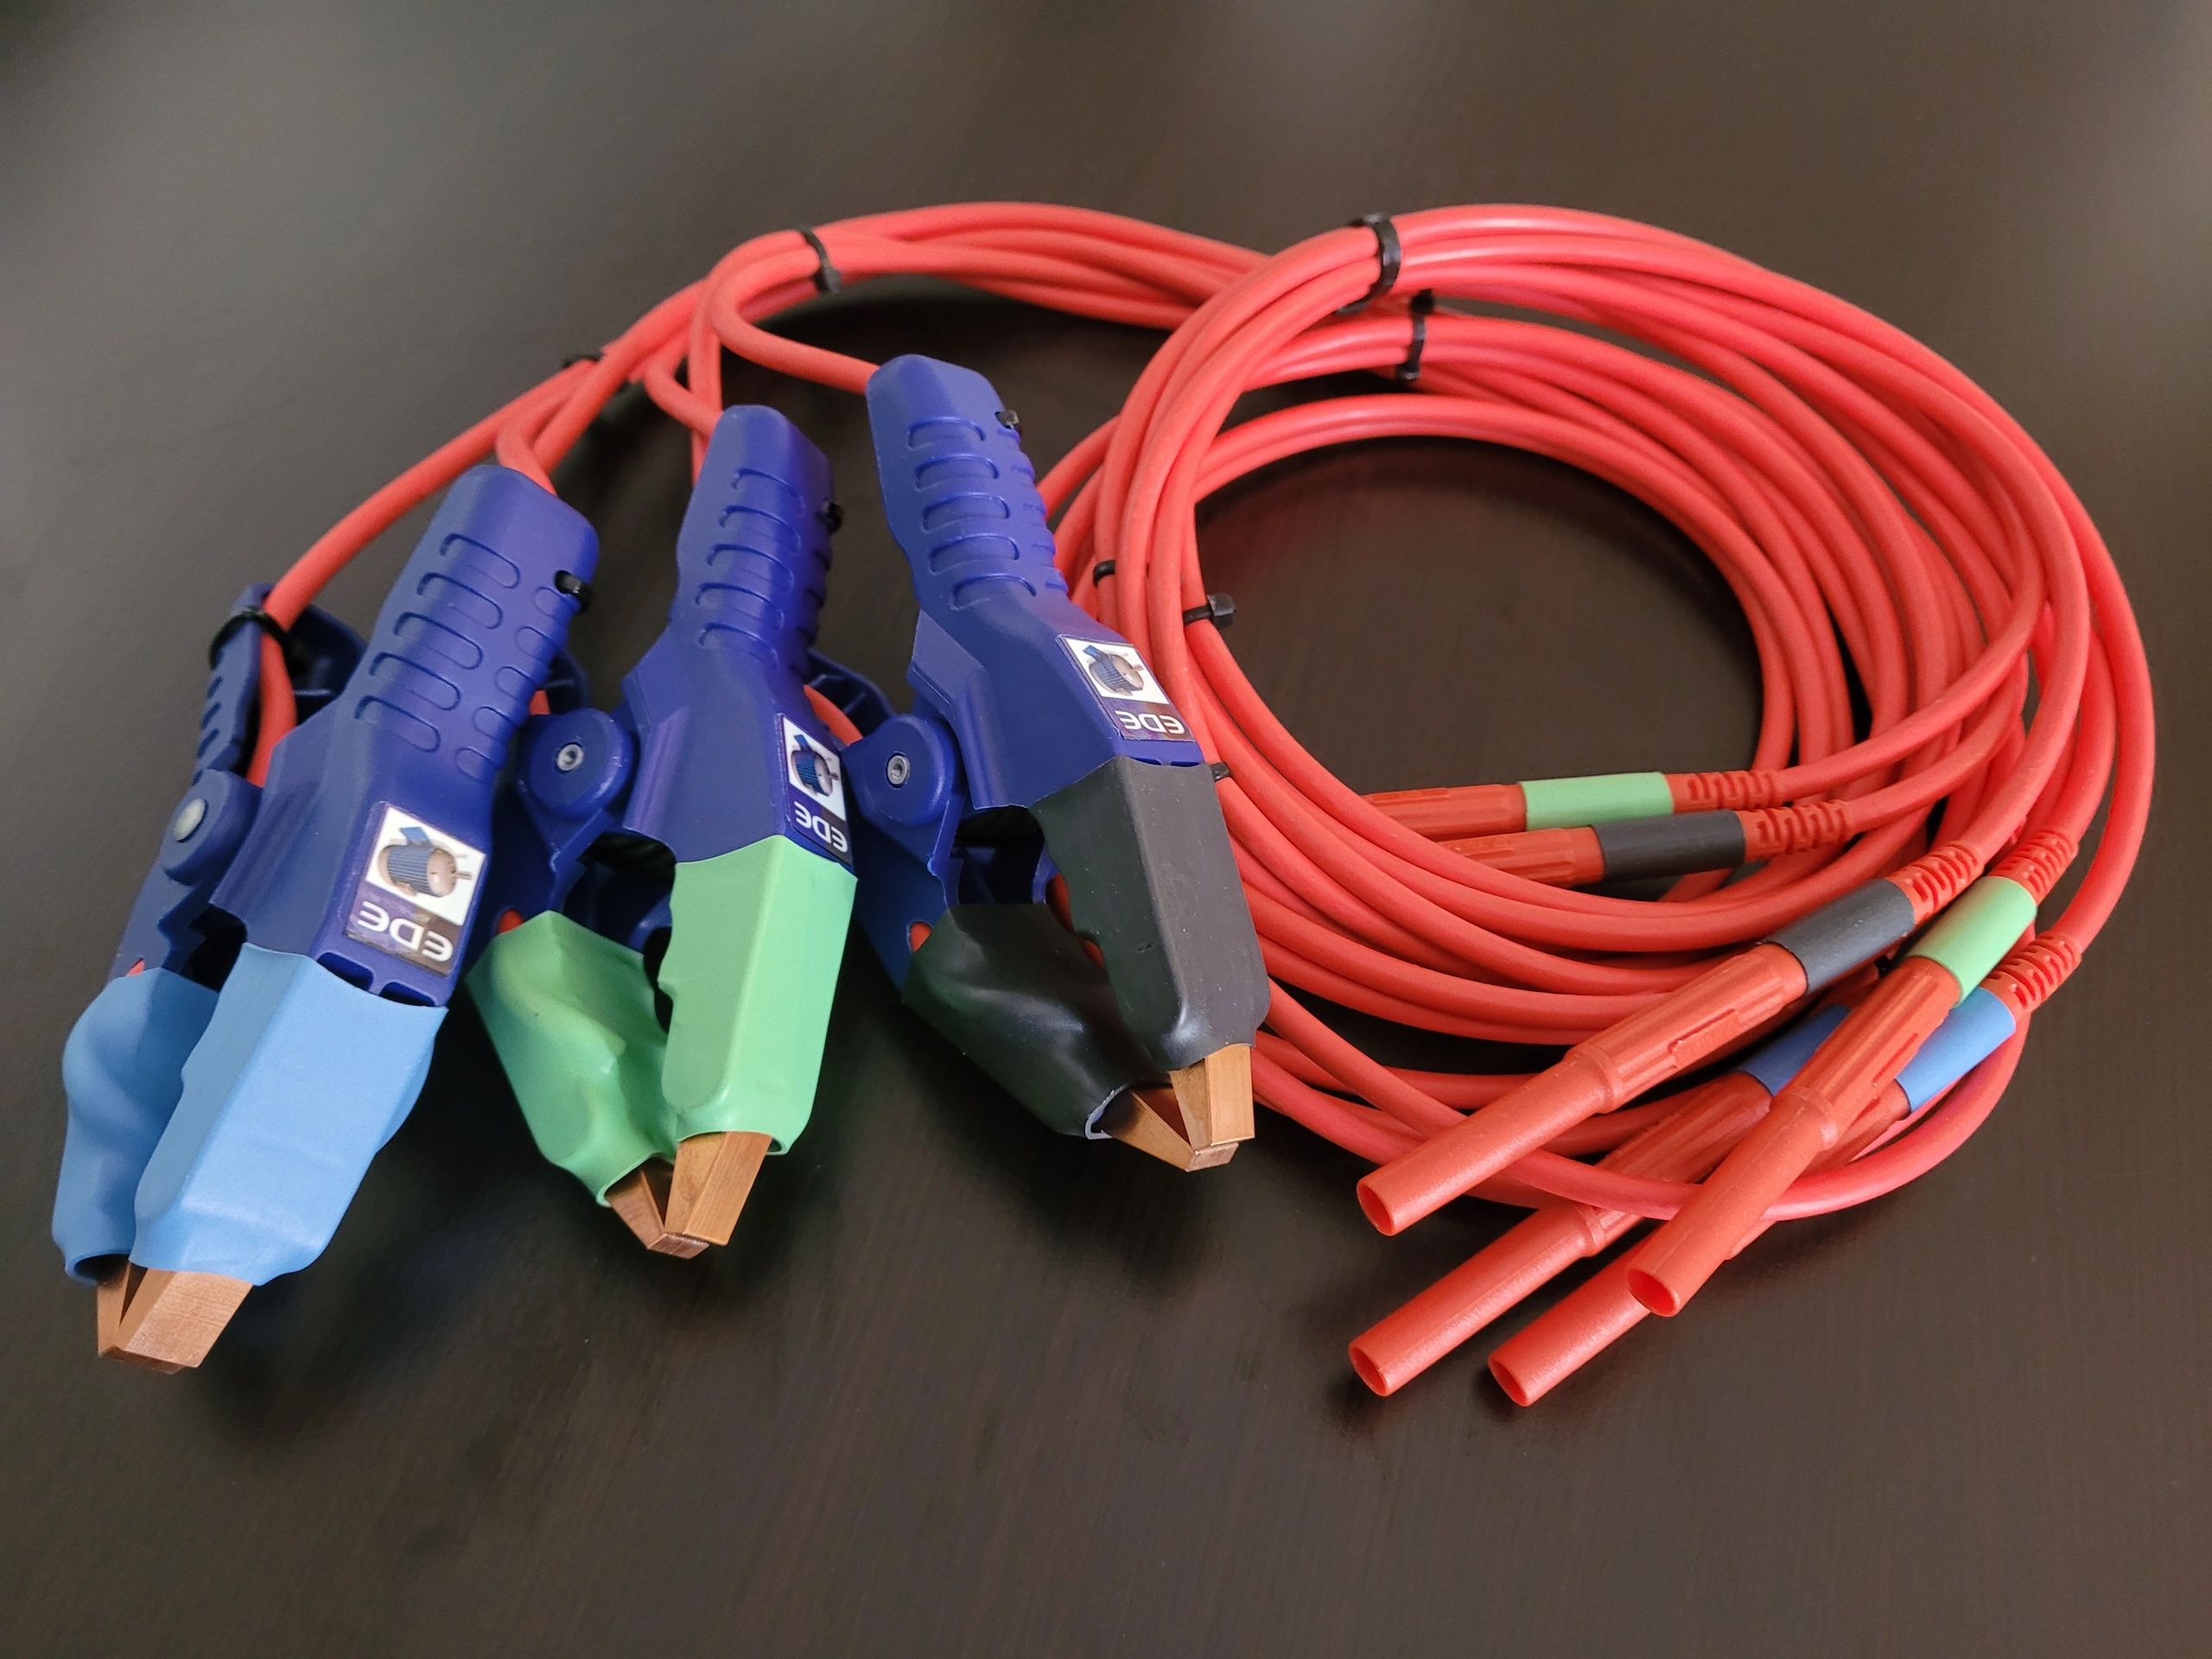 Heavy duty replacement test leads